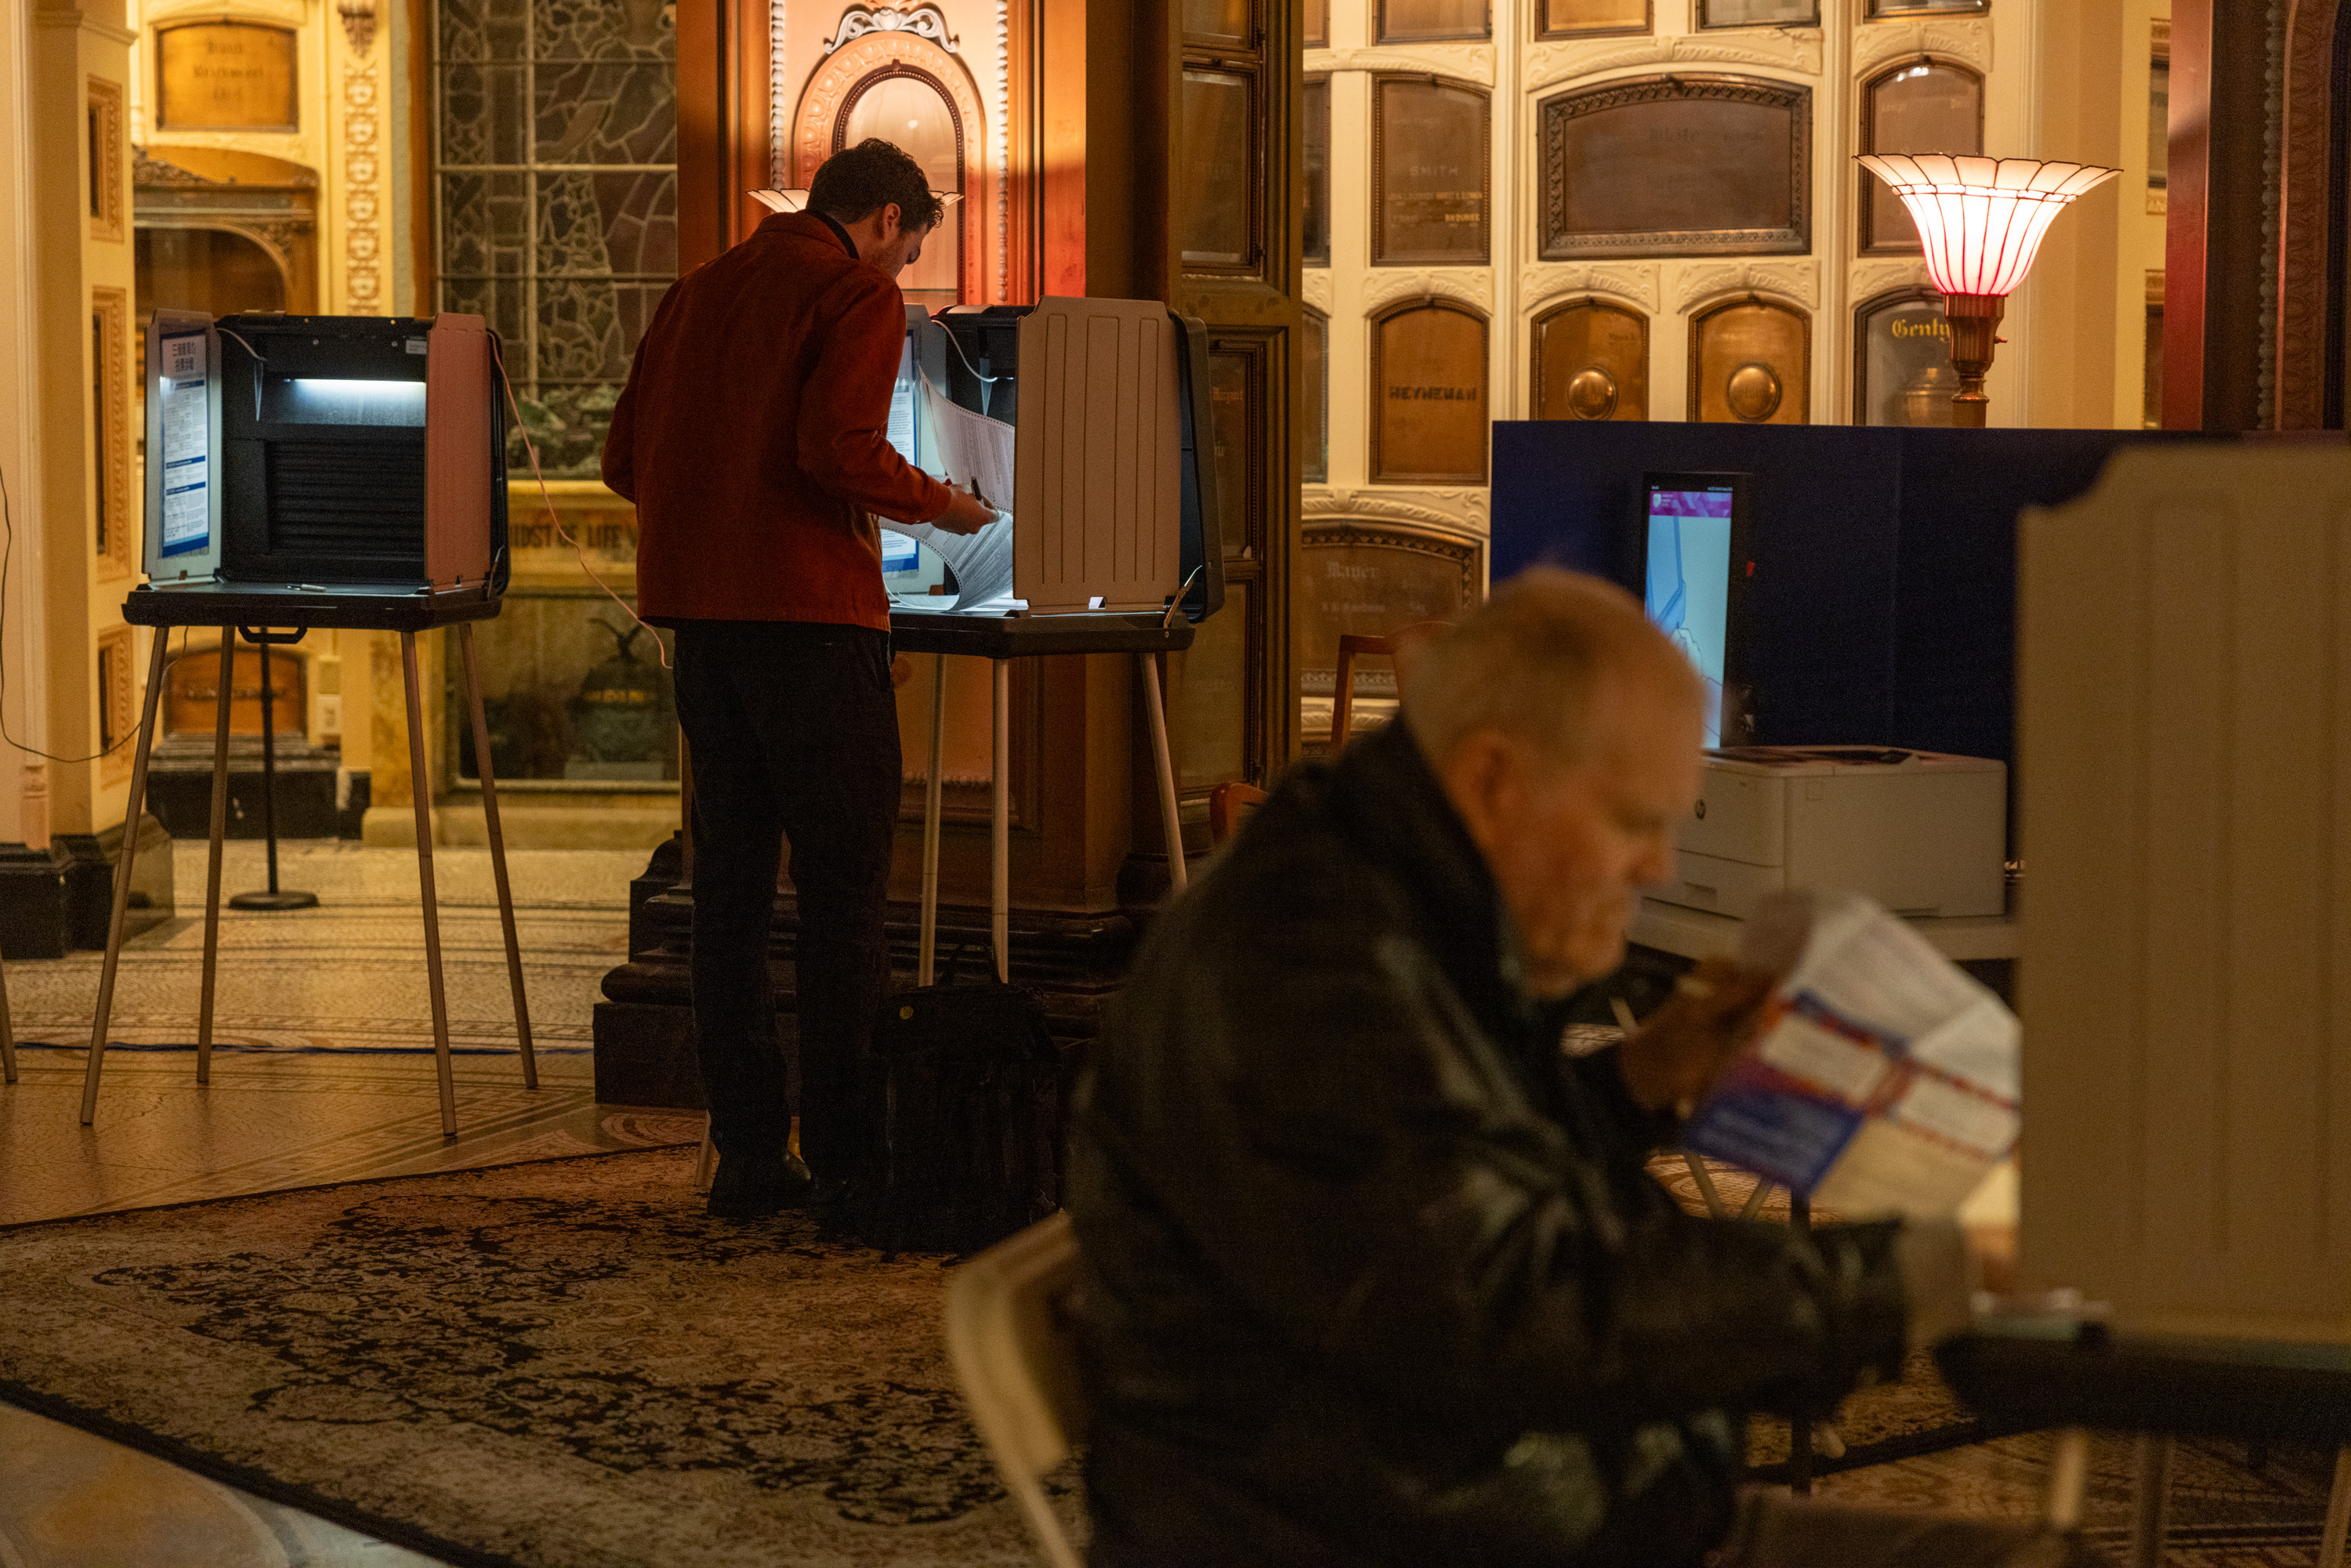 A man in red votes at a booth while another reads a paper in an ornate room with vintage decor.